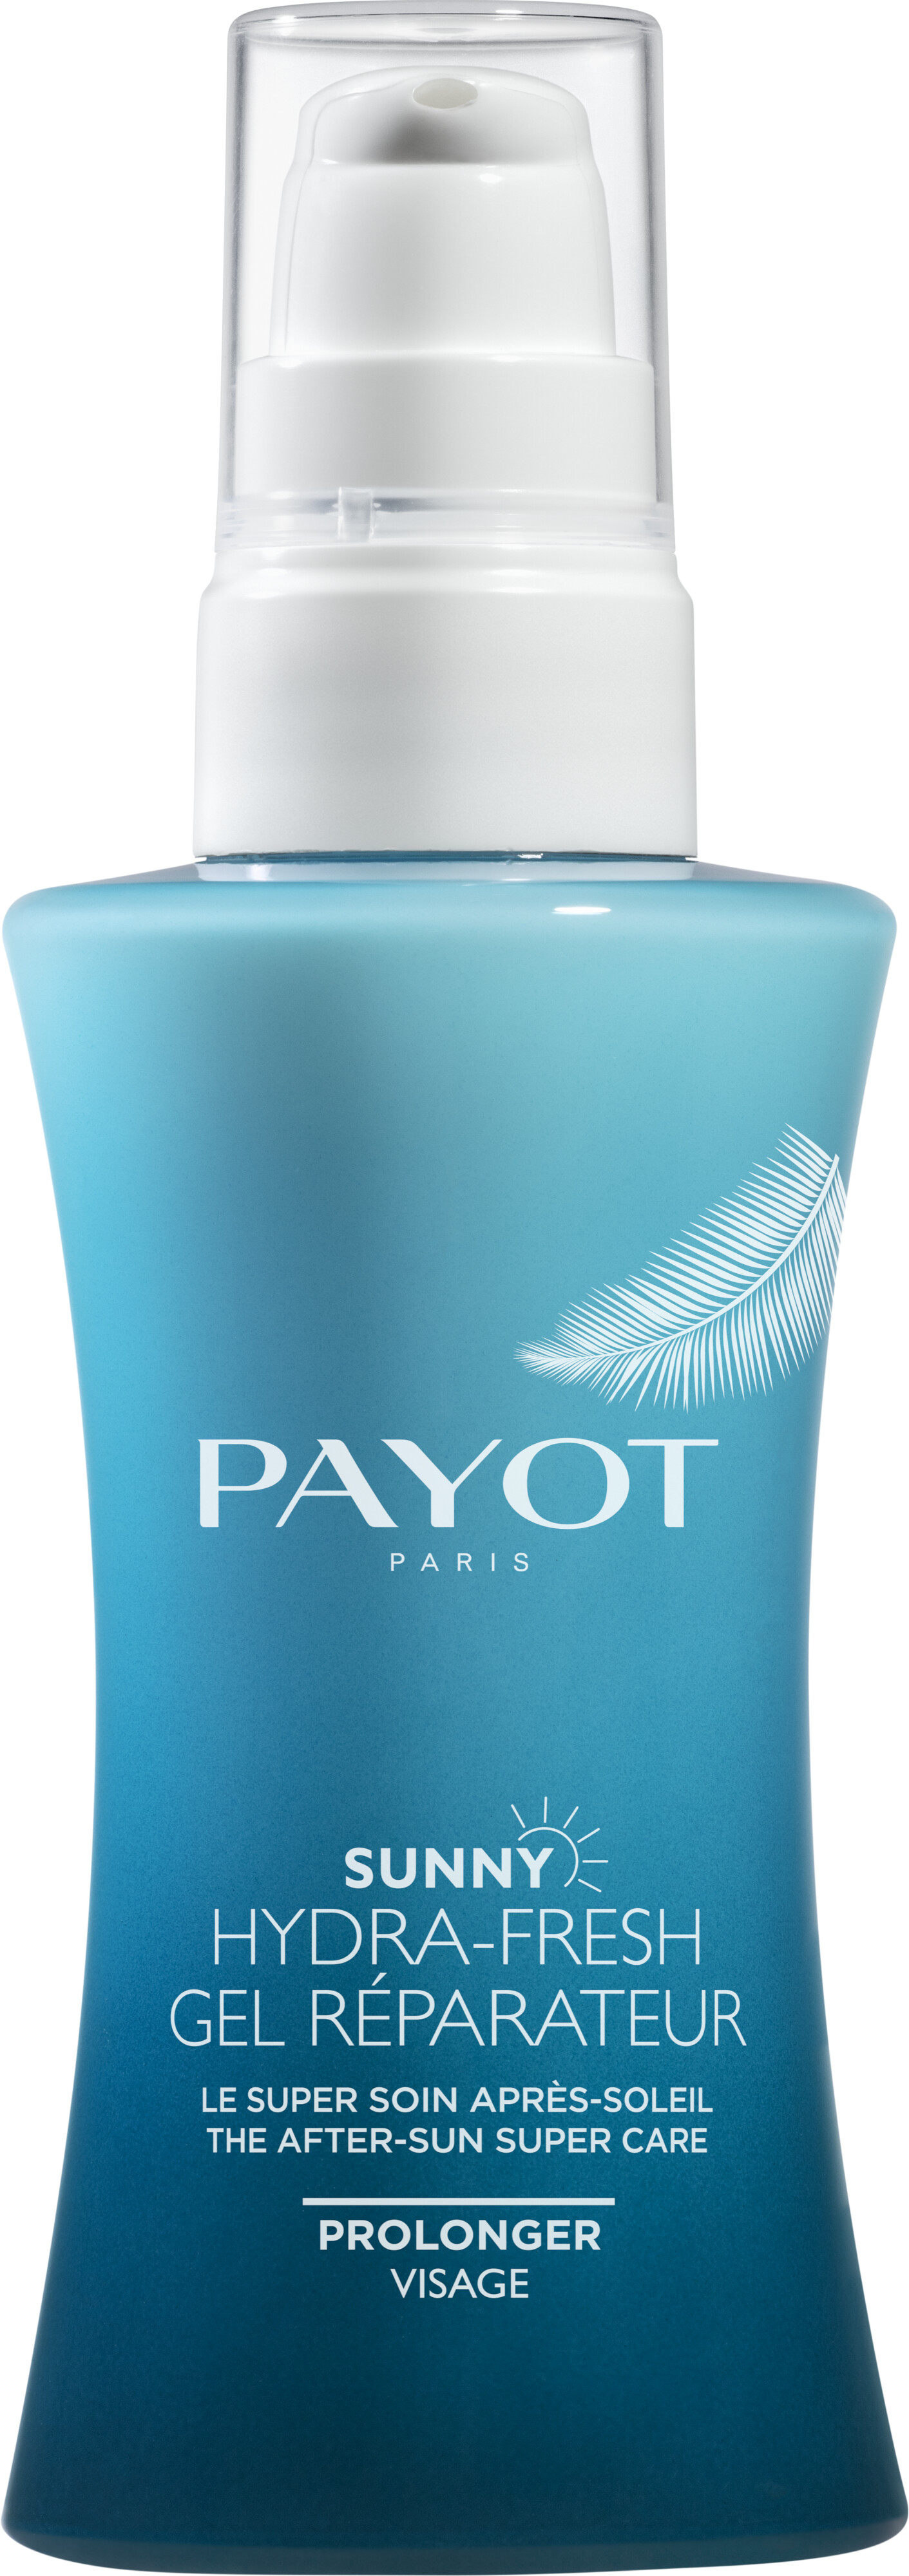 PAYOT Sunny Hydra-Fresh Gel Reparateur After Sun Super Care 75ml